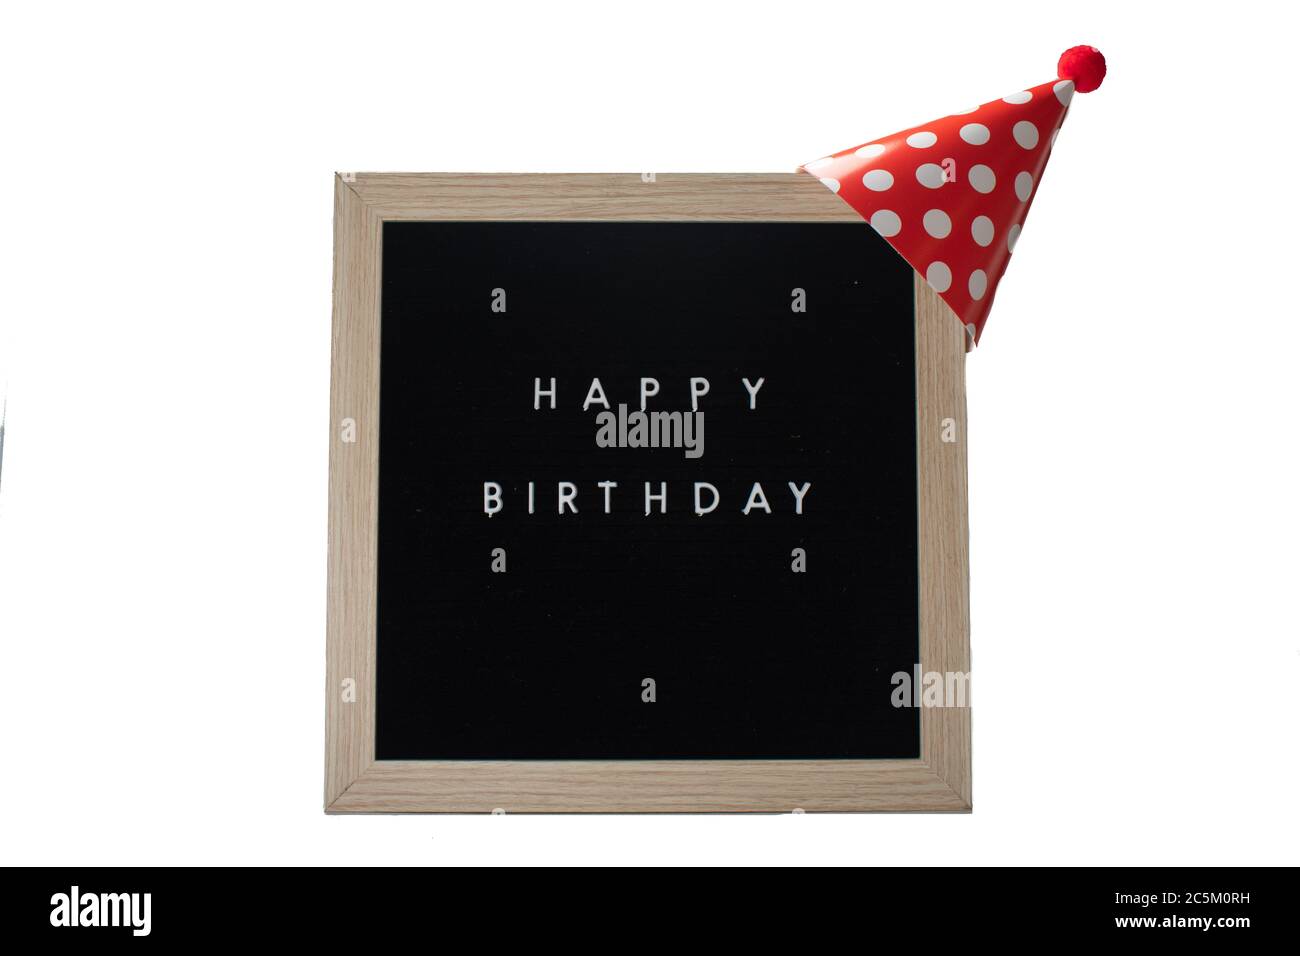 A Black Sign With a Birch Frame That Says Happy Birthday With a Red Polka-Dotted Birthday Hat and a Red Cotton Ball on Top on a Pure White Background Stock Photo